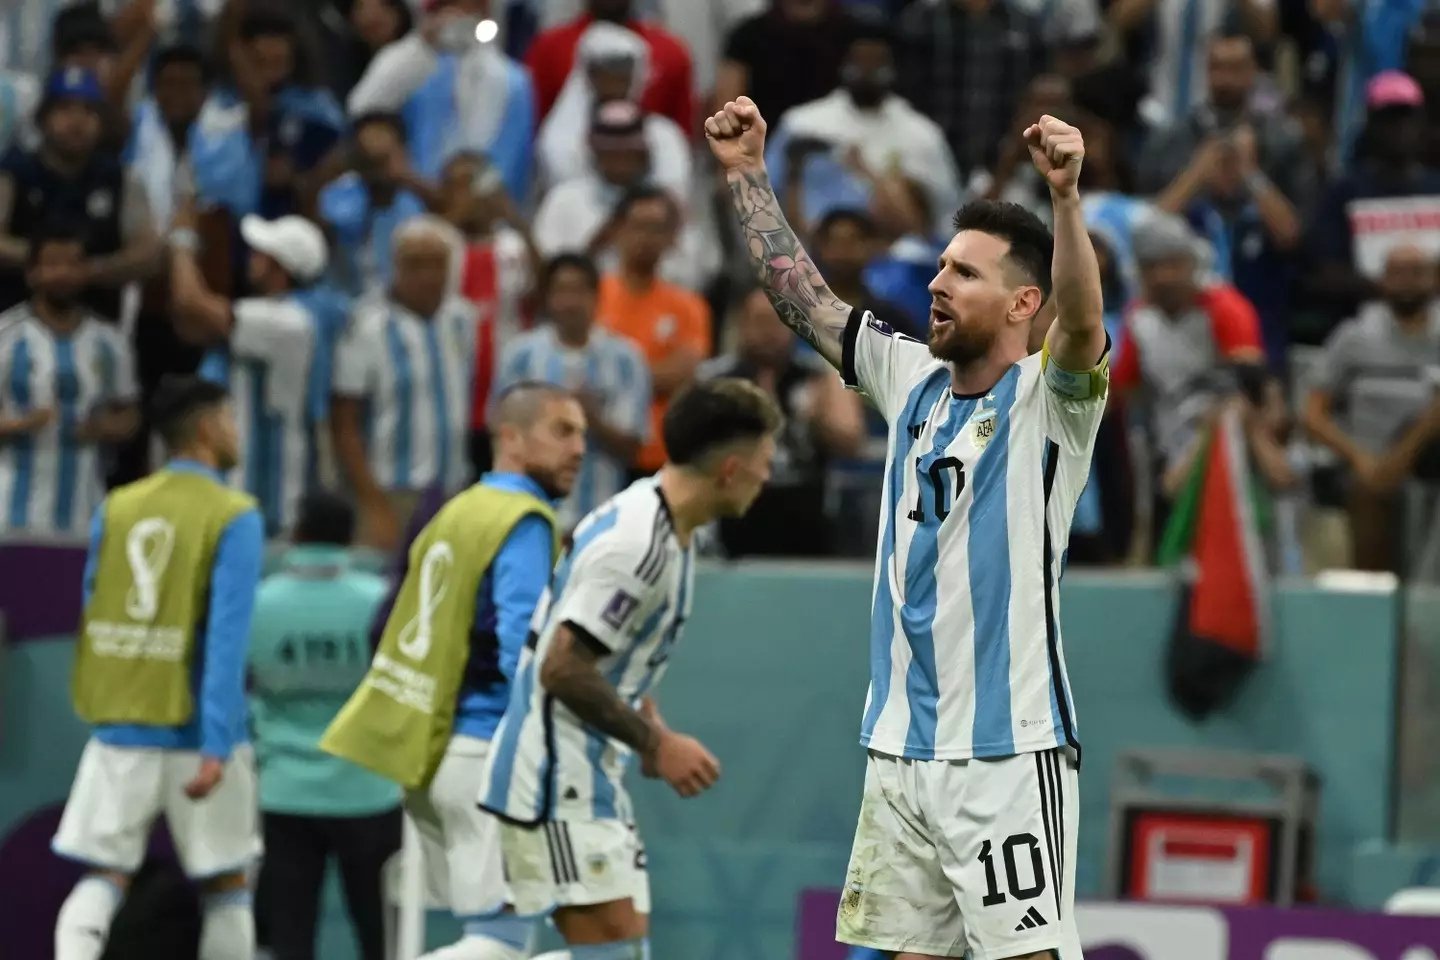 Lionel Messi has urged Fifa to drop a referee after the Netherlands vs Argentina game.